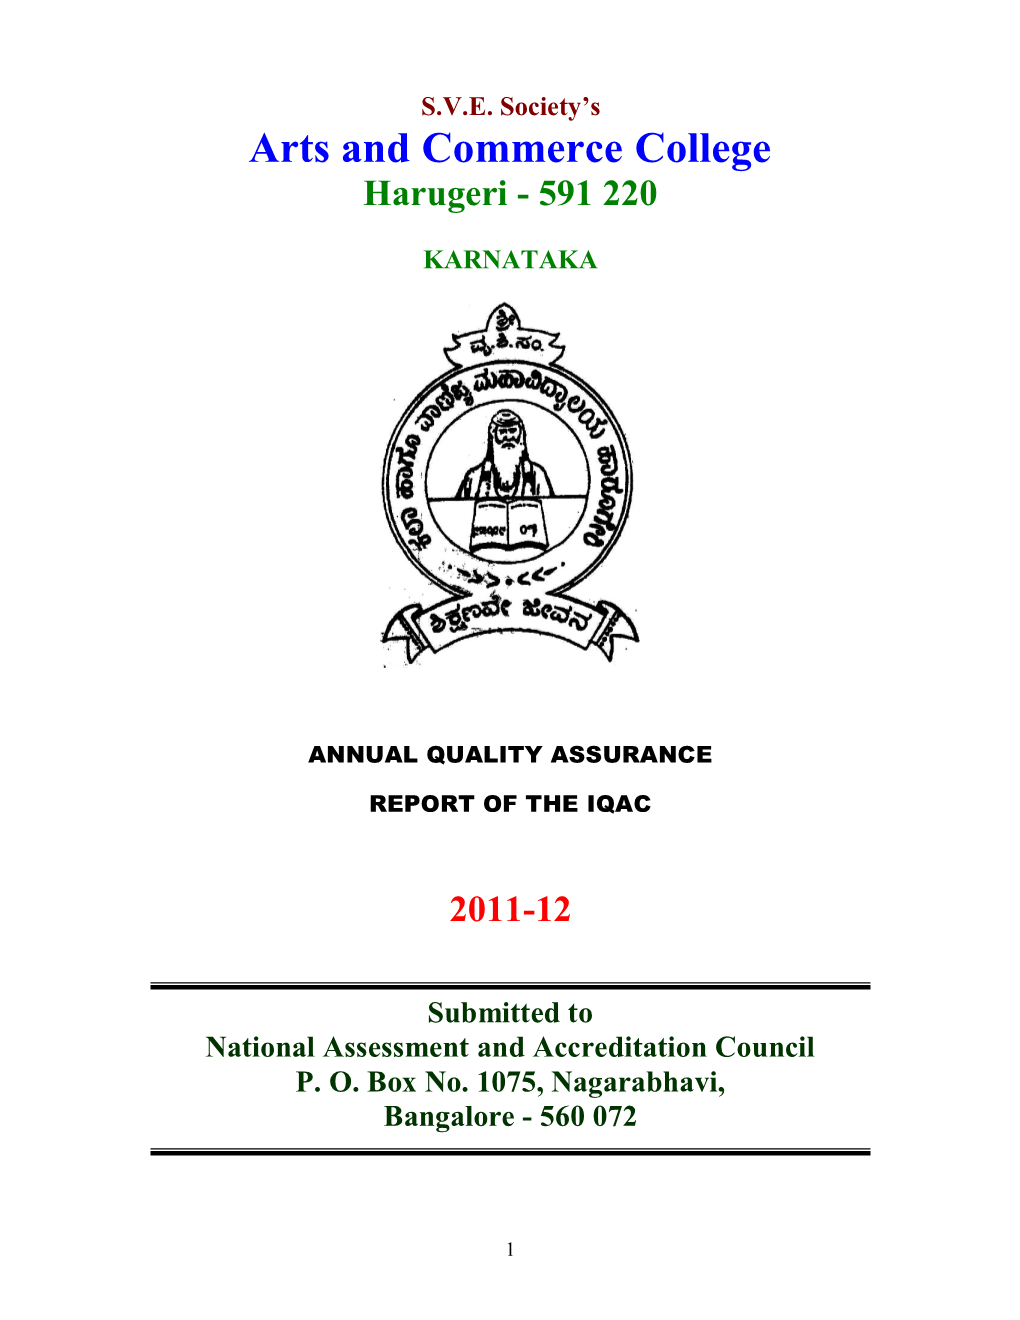 Arts and Commerce College Harugeri - 591 220